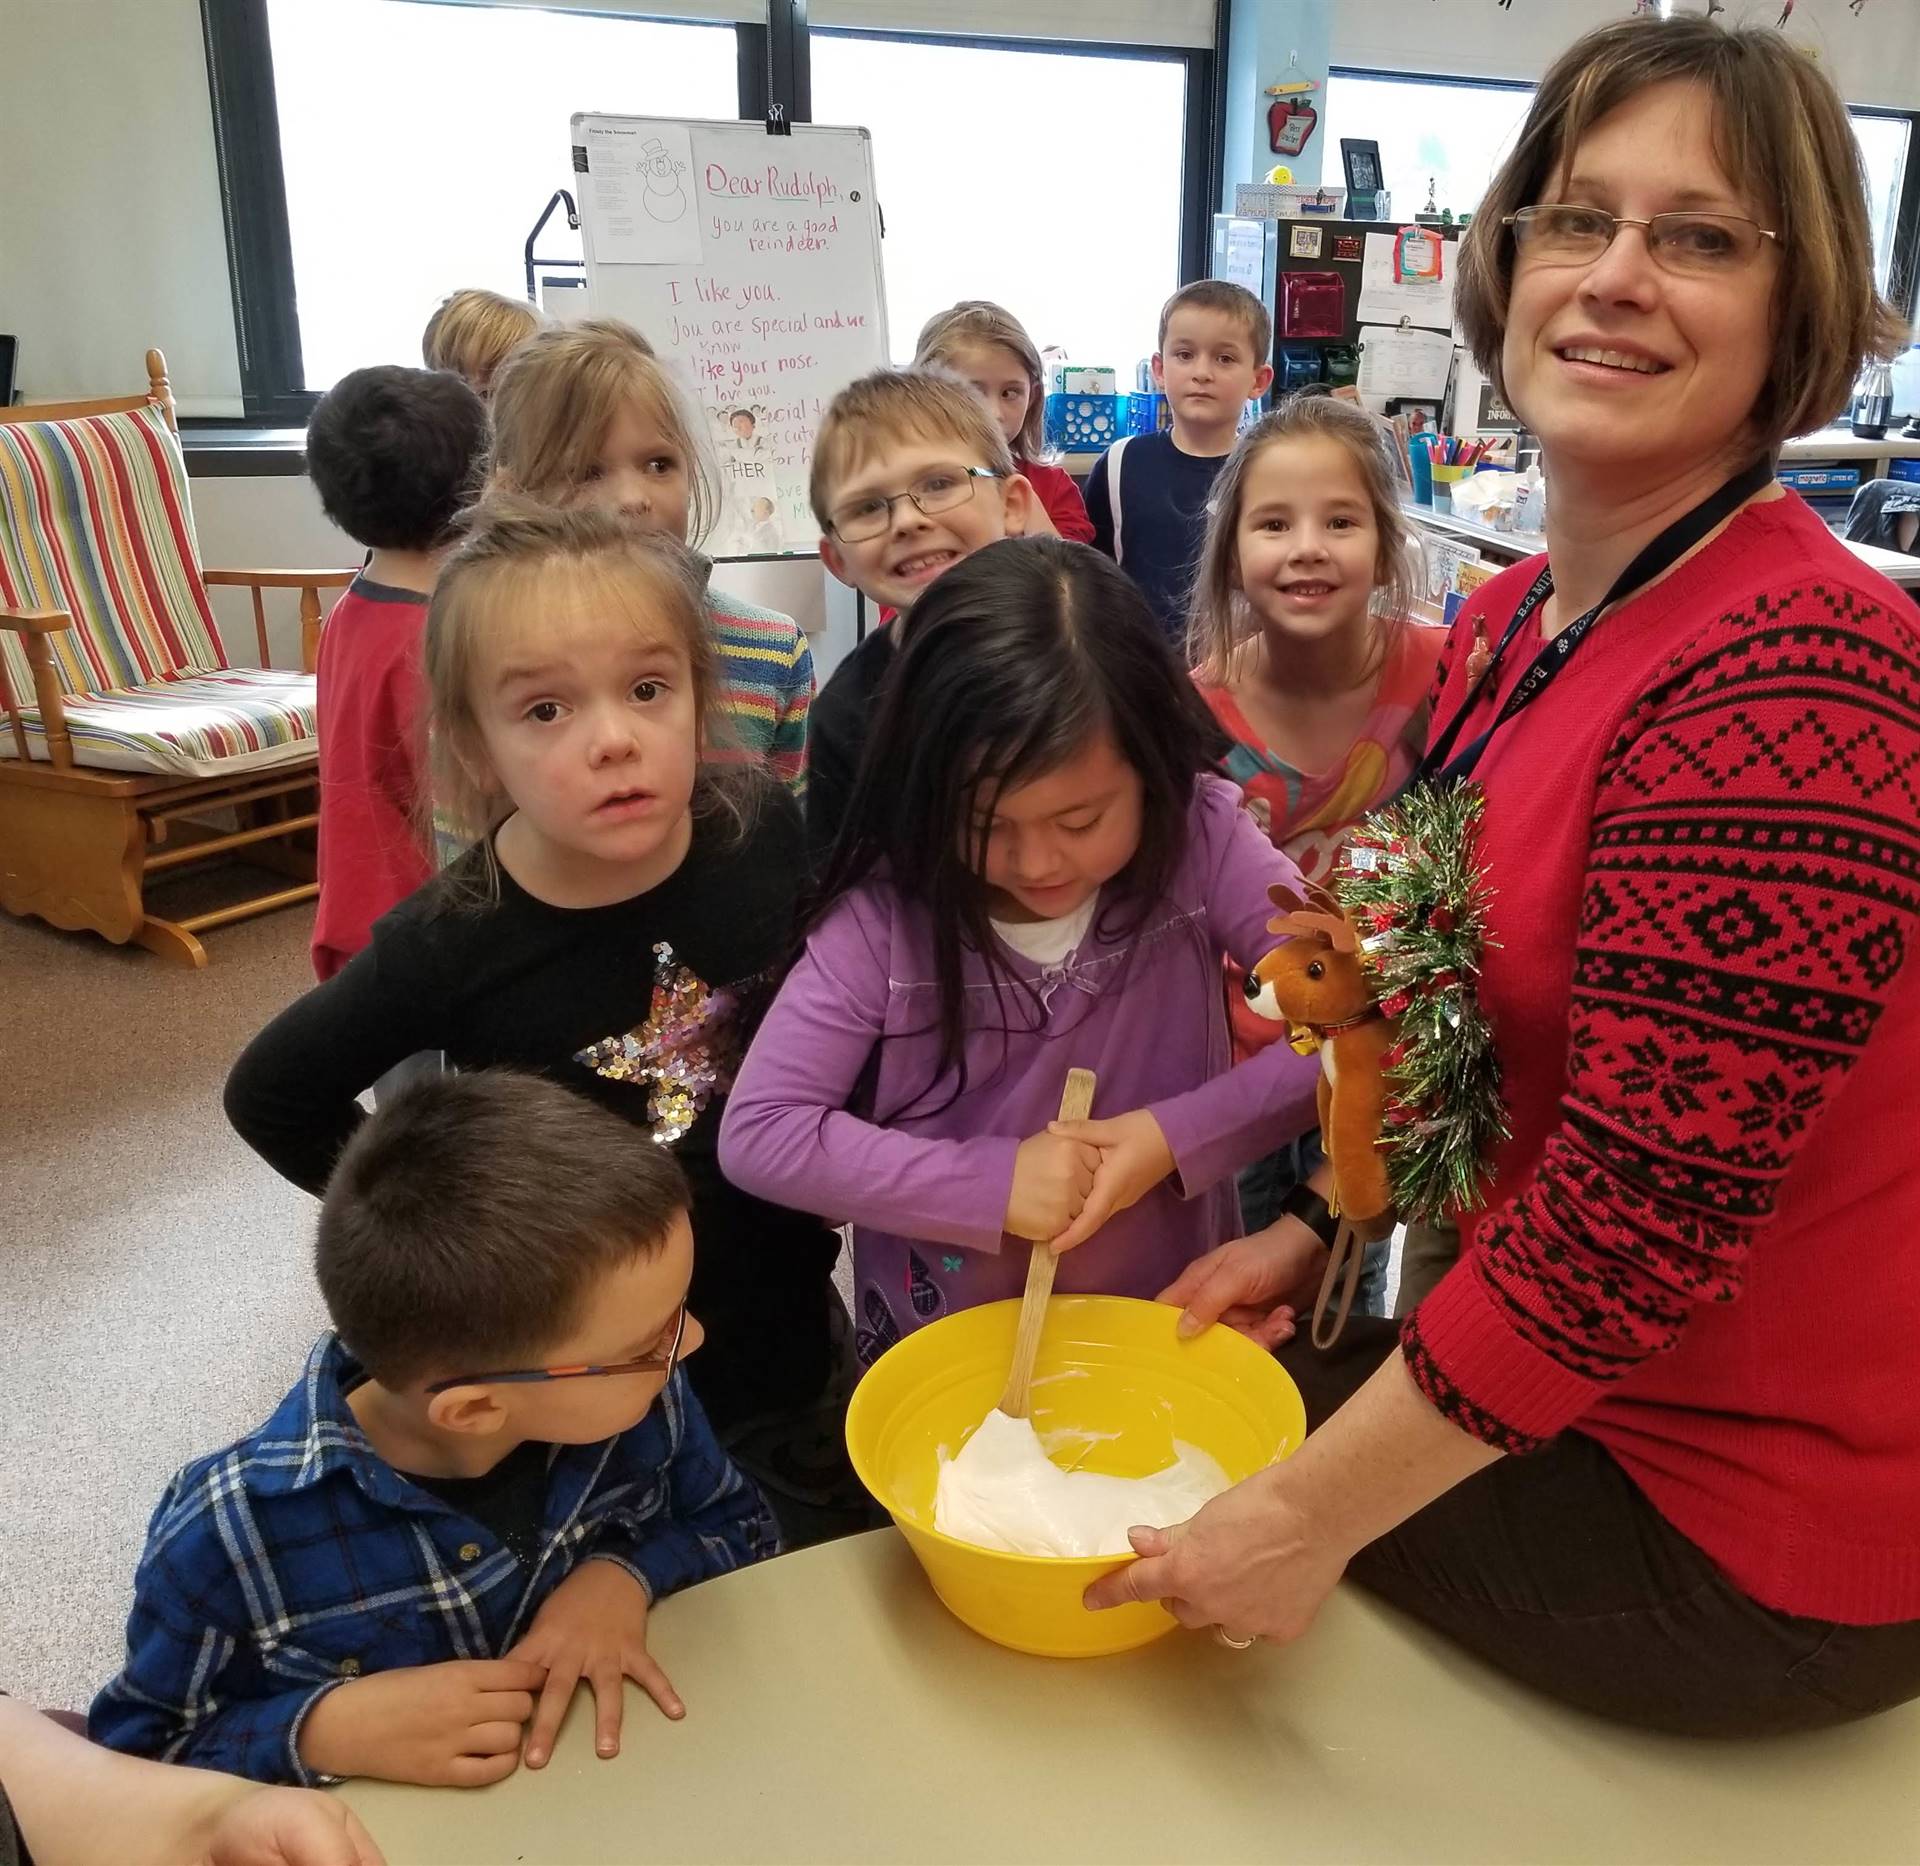 Students and staff use Cooperation to make snow slime